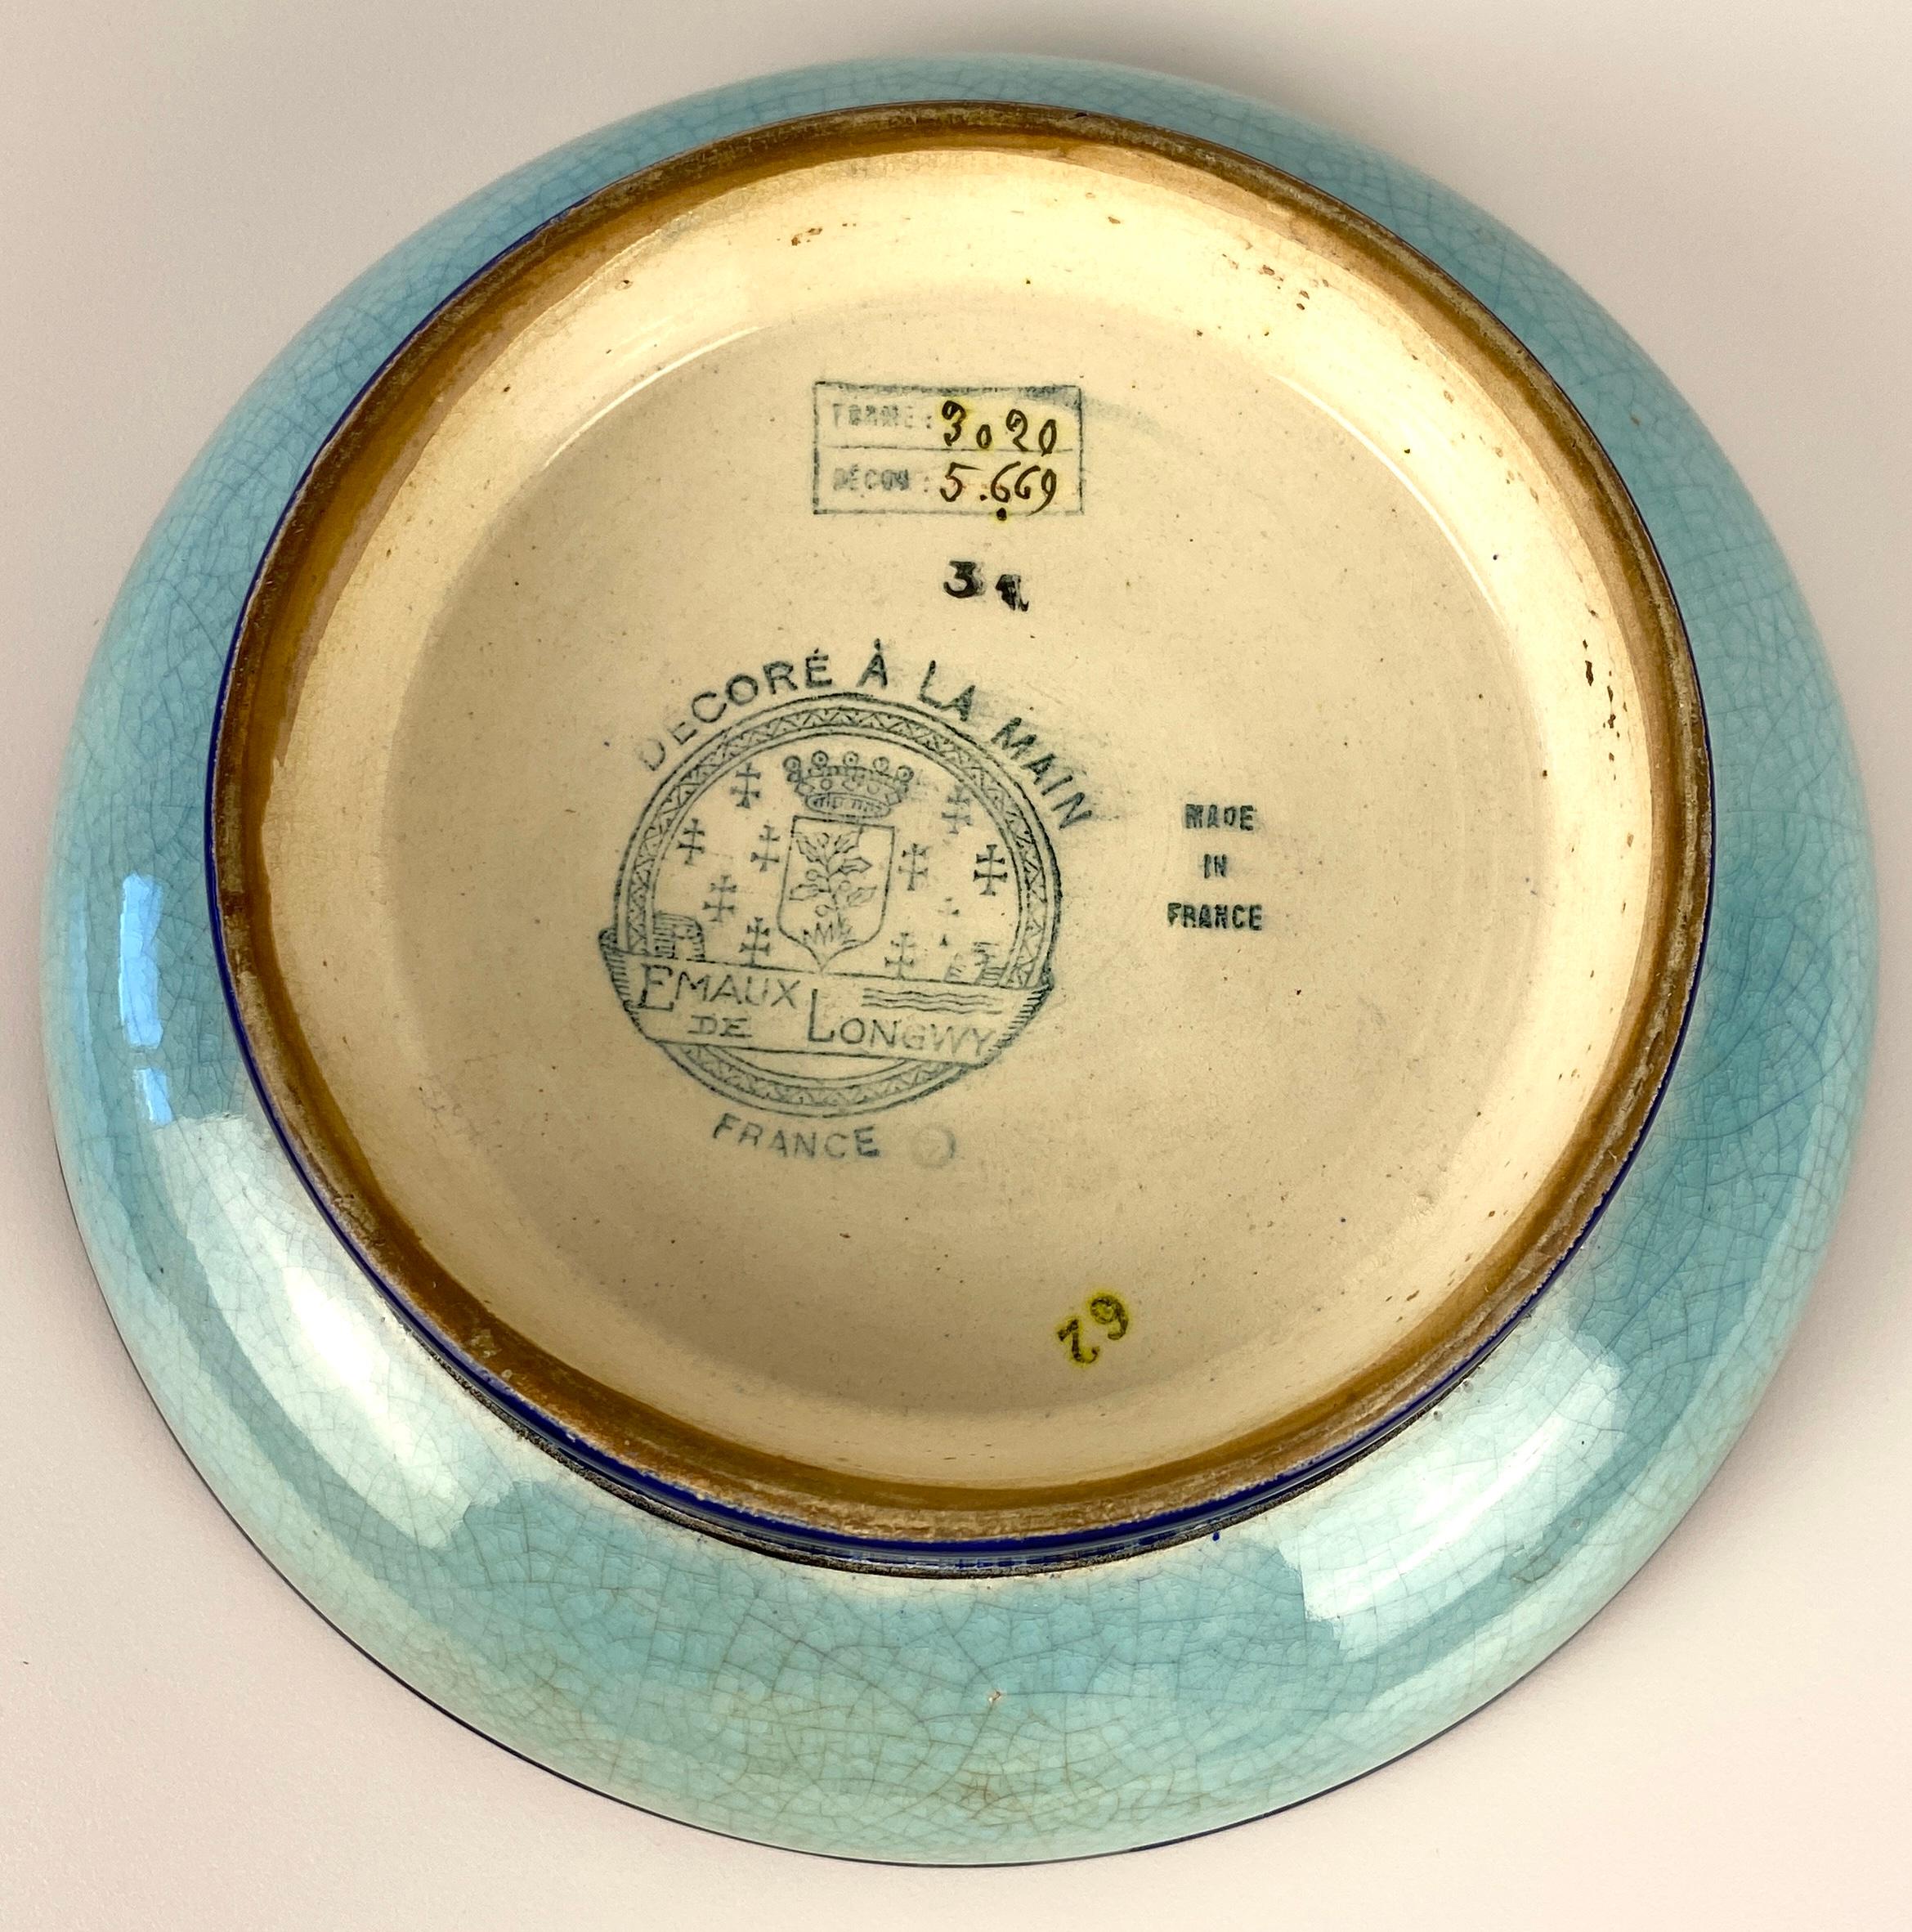 A stunning Art Deco period faience bowl, made in France by the Emaux de Longwy art pottery workshop and dating circa 1920-30s. This earthenware bowl is hand-decorated with Chinoiserie decor and a cloisonné-style enameled glaze.

The decoration